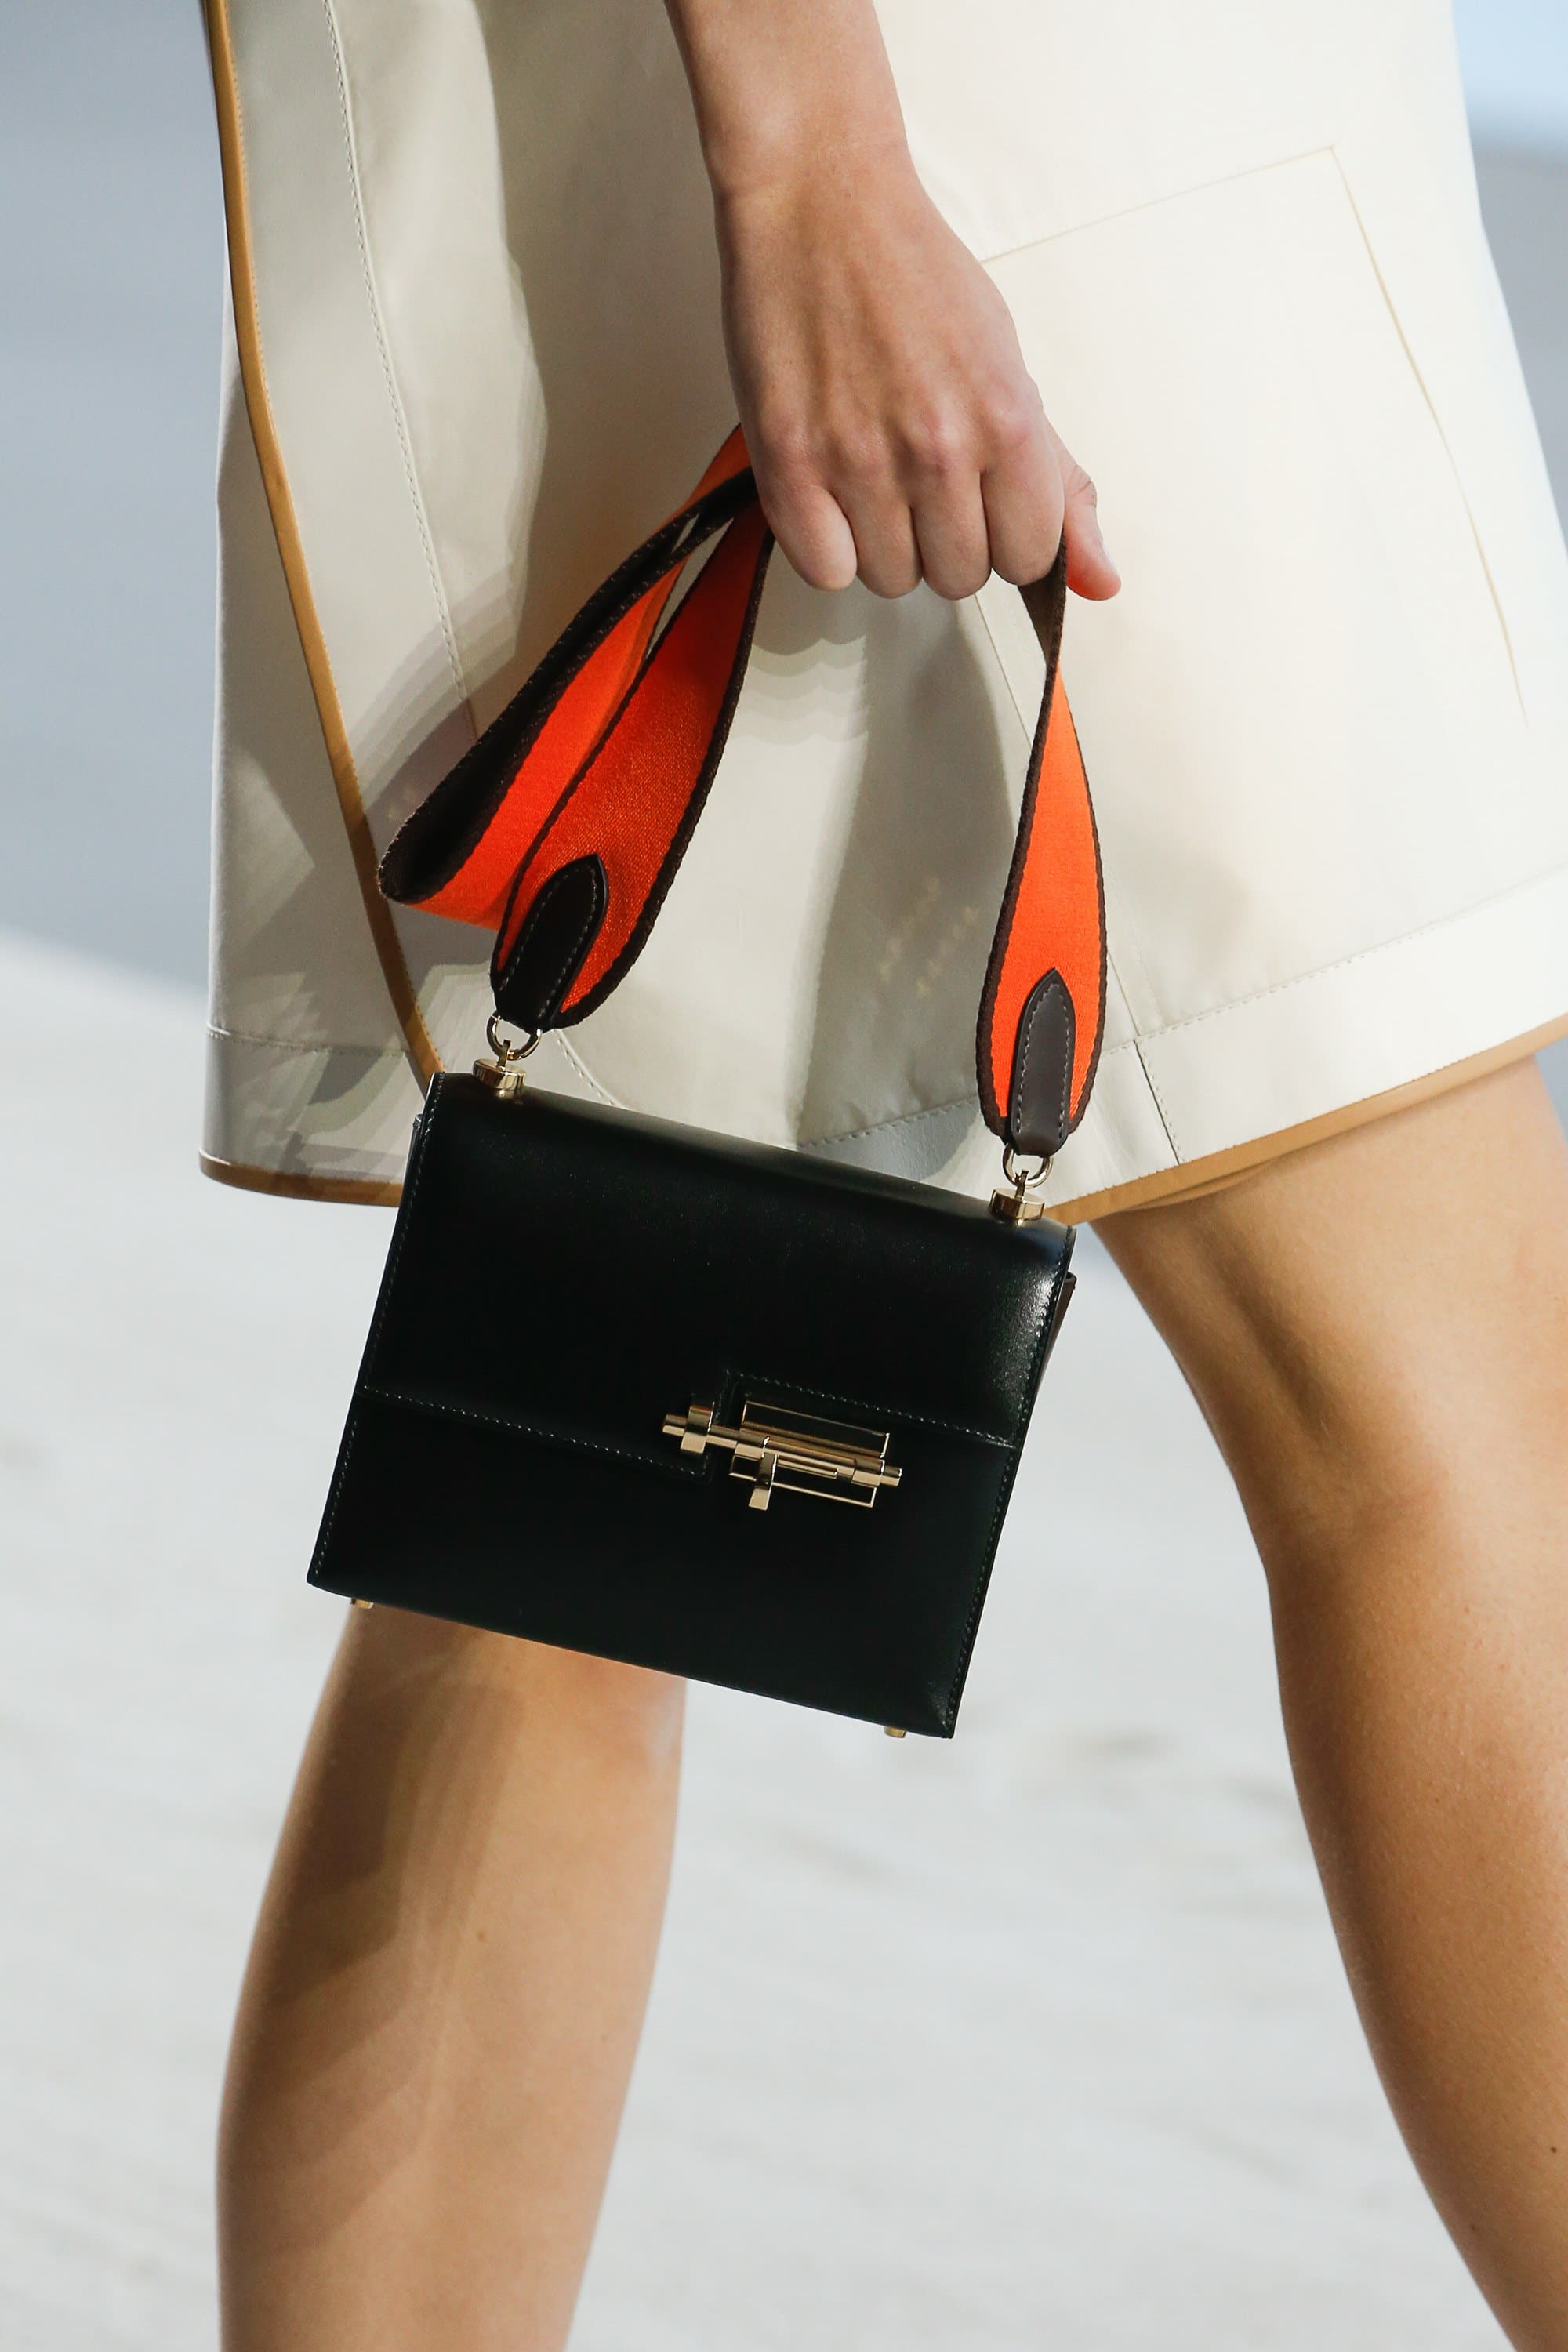 Hermes Spring Summer 2019 Runway Bag Collection Spotted Fashion